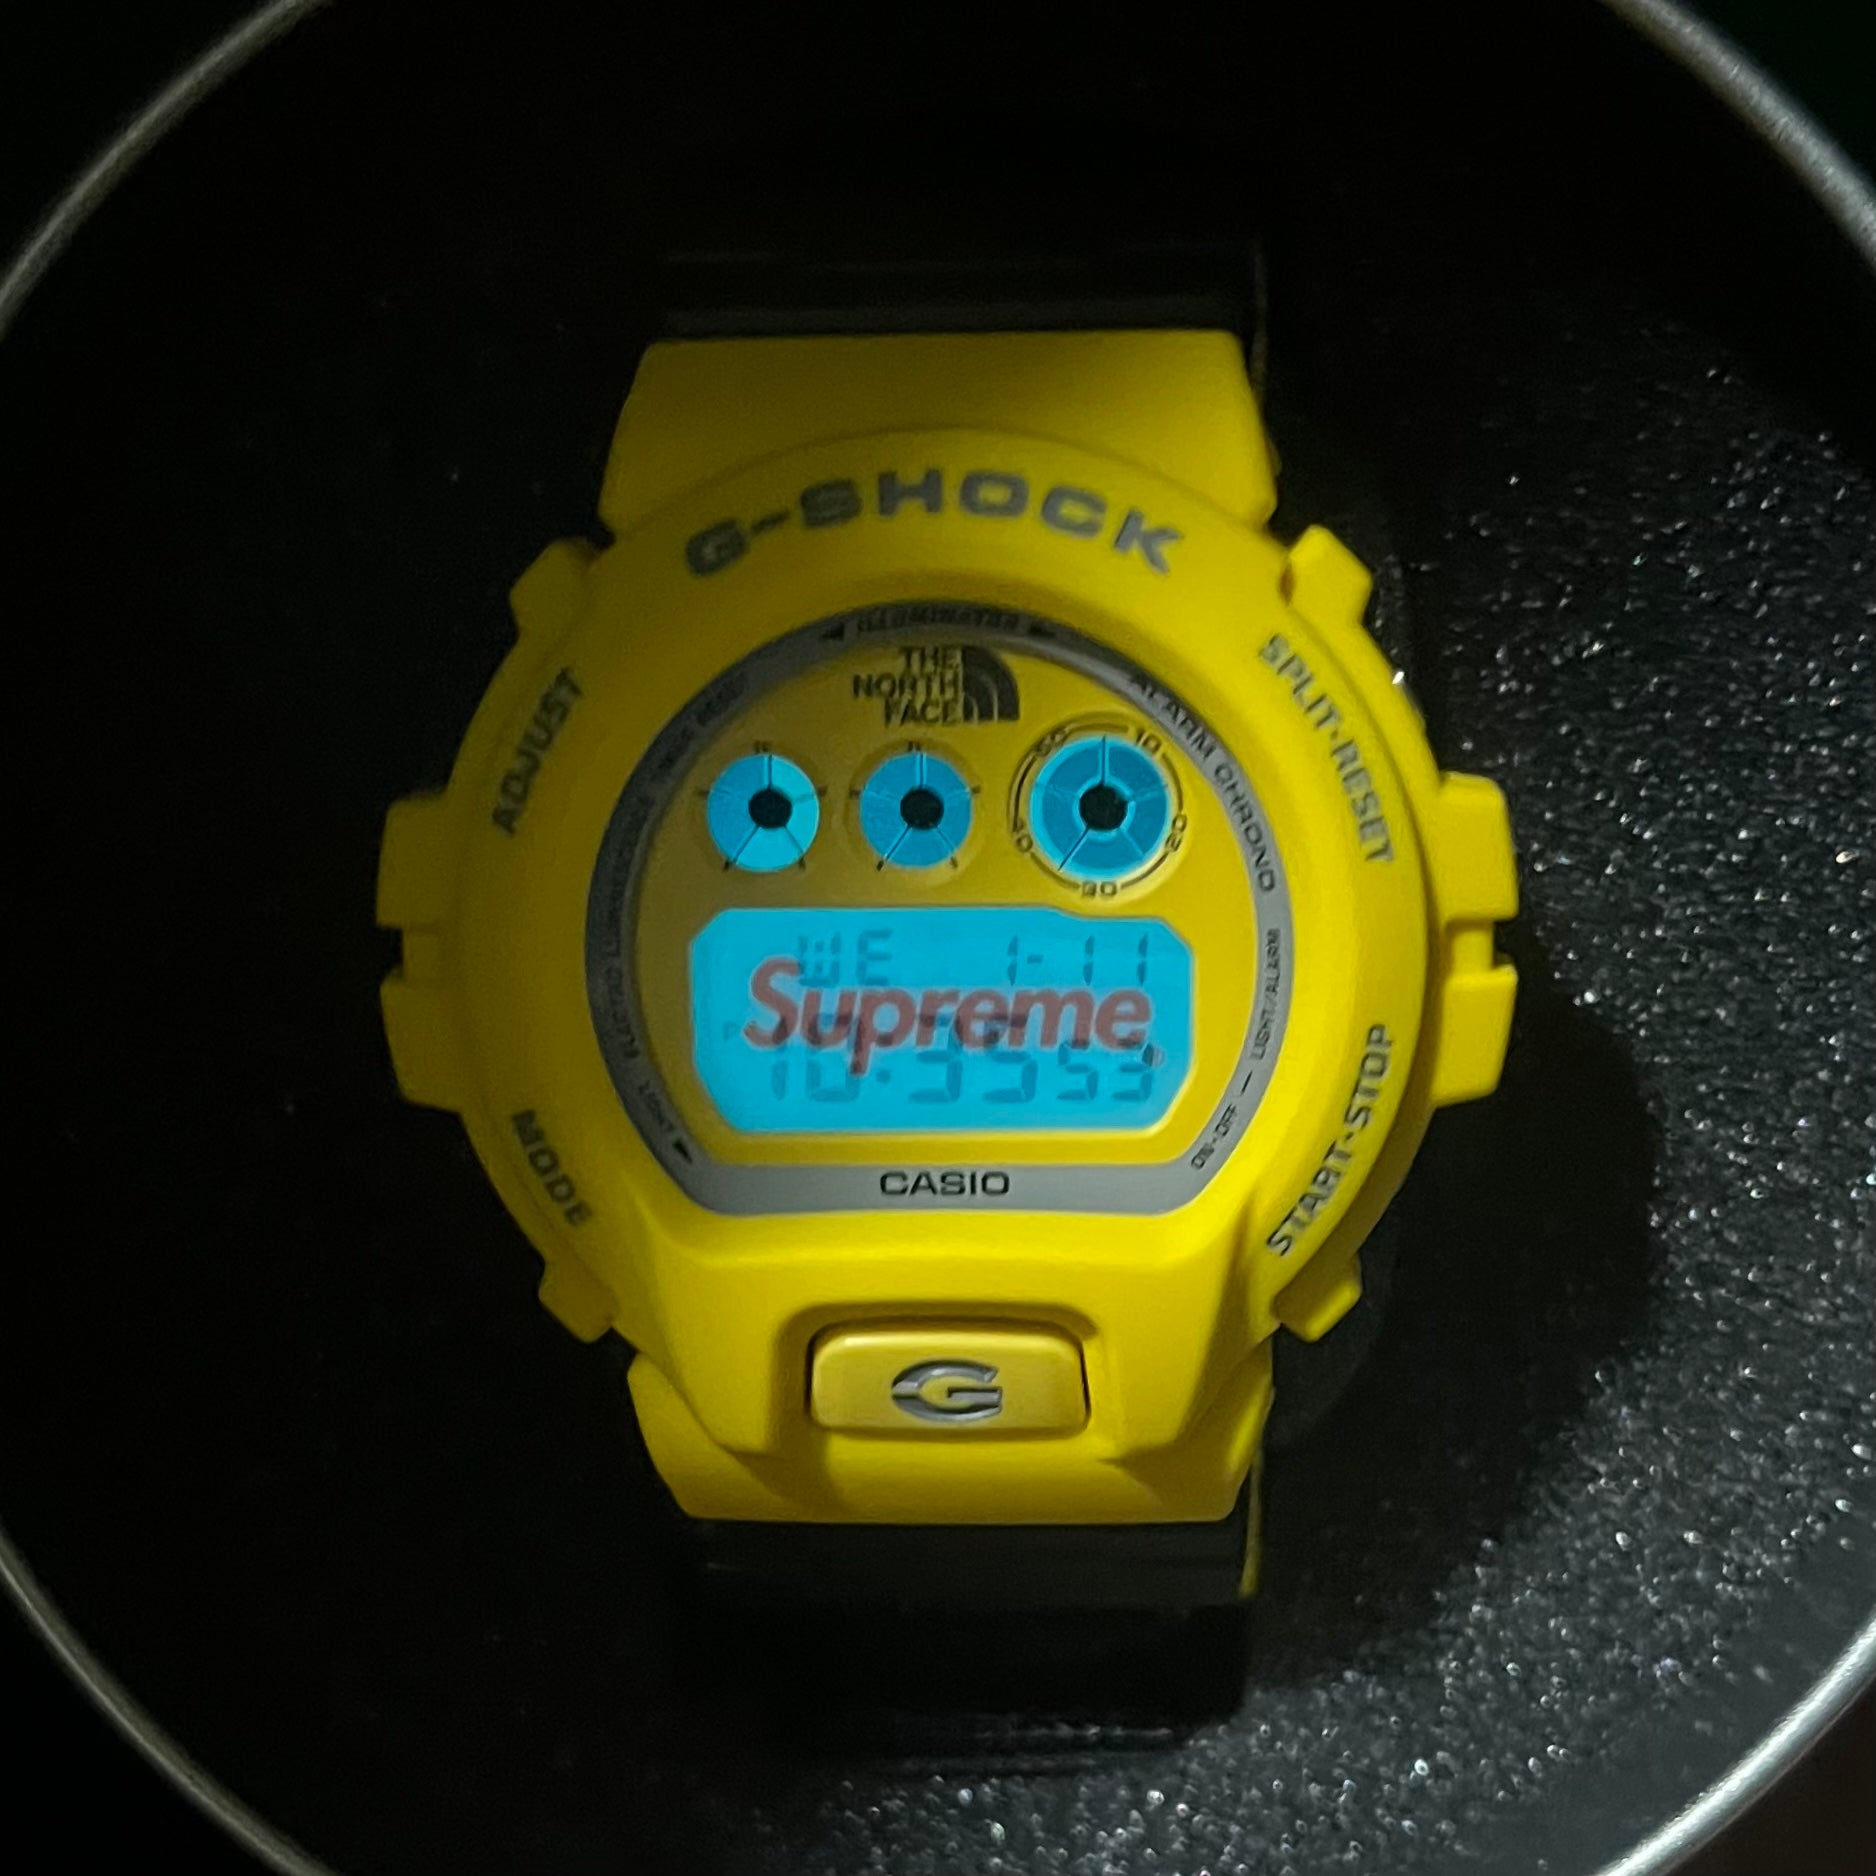 Supreme x The North Face x G-SHOCK Watch – SneakerRack